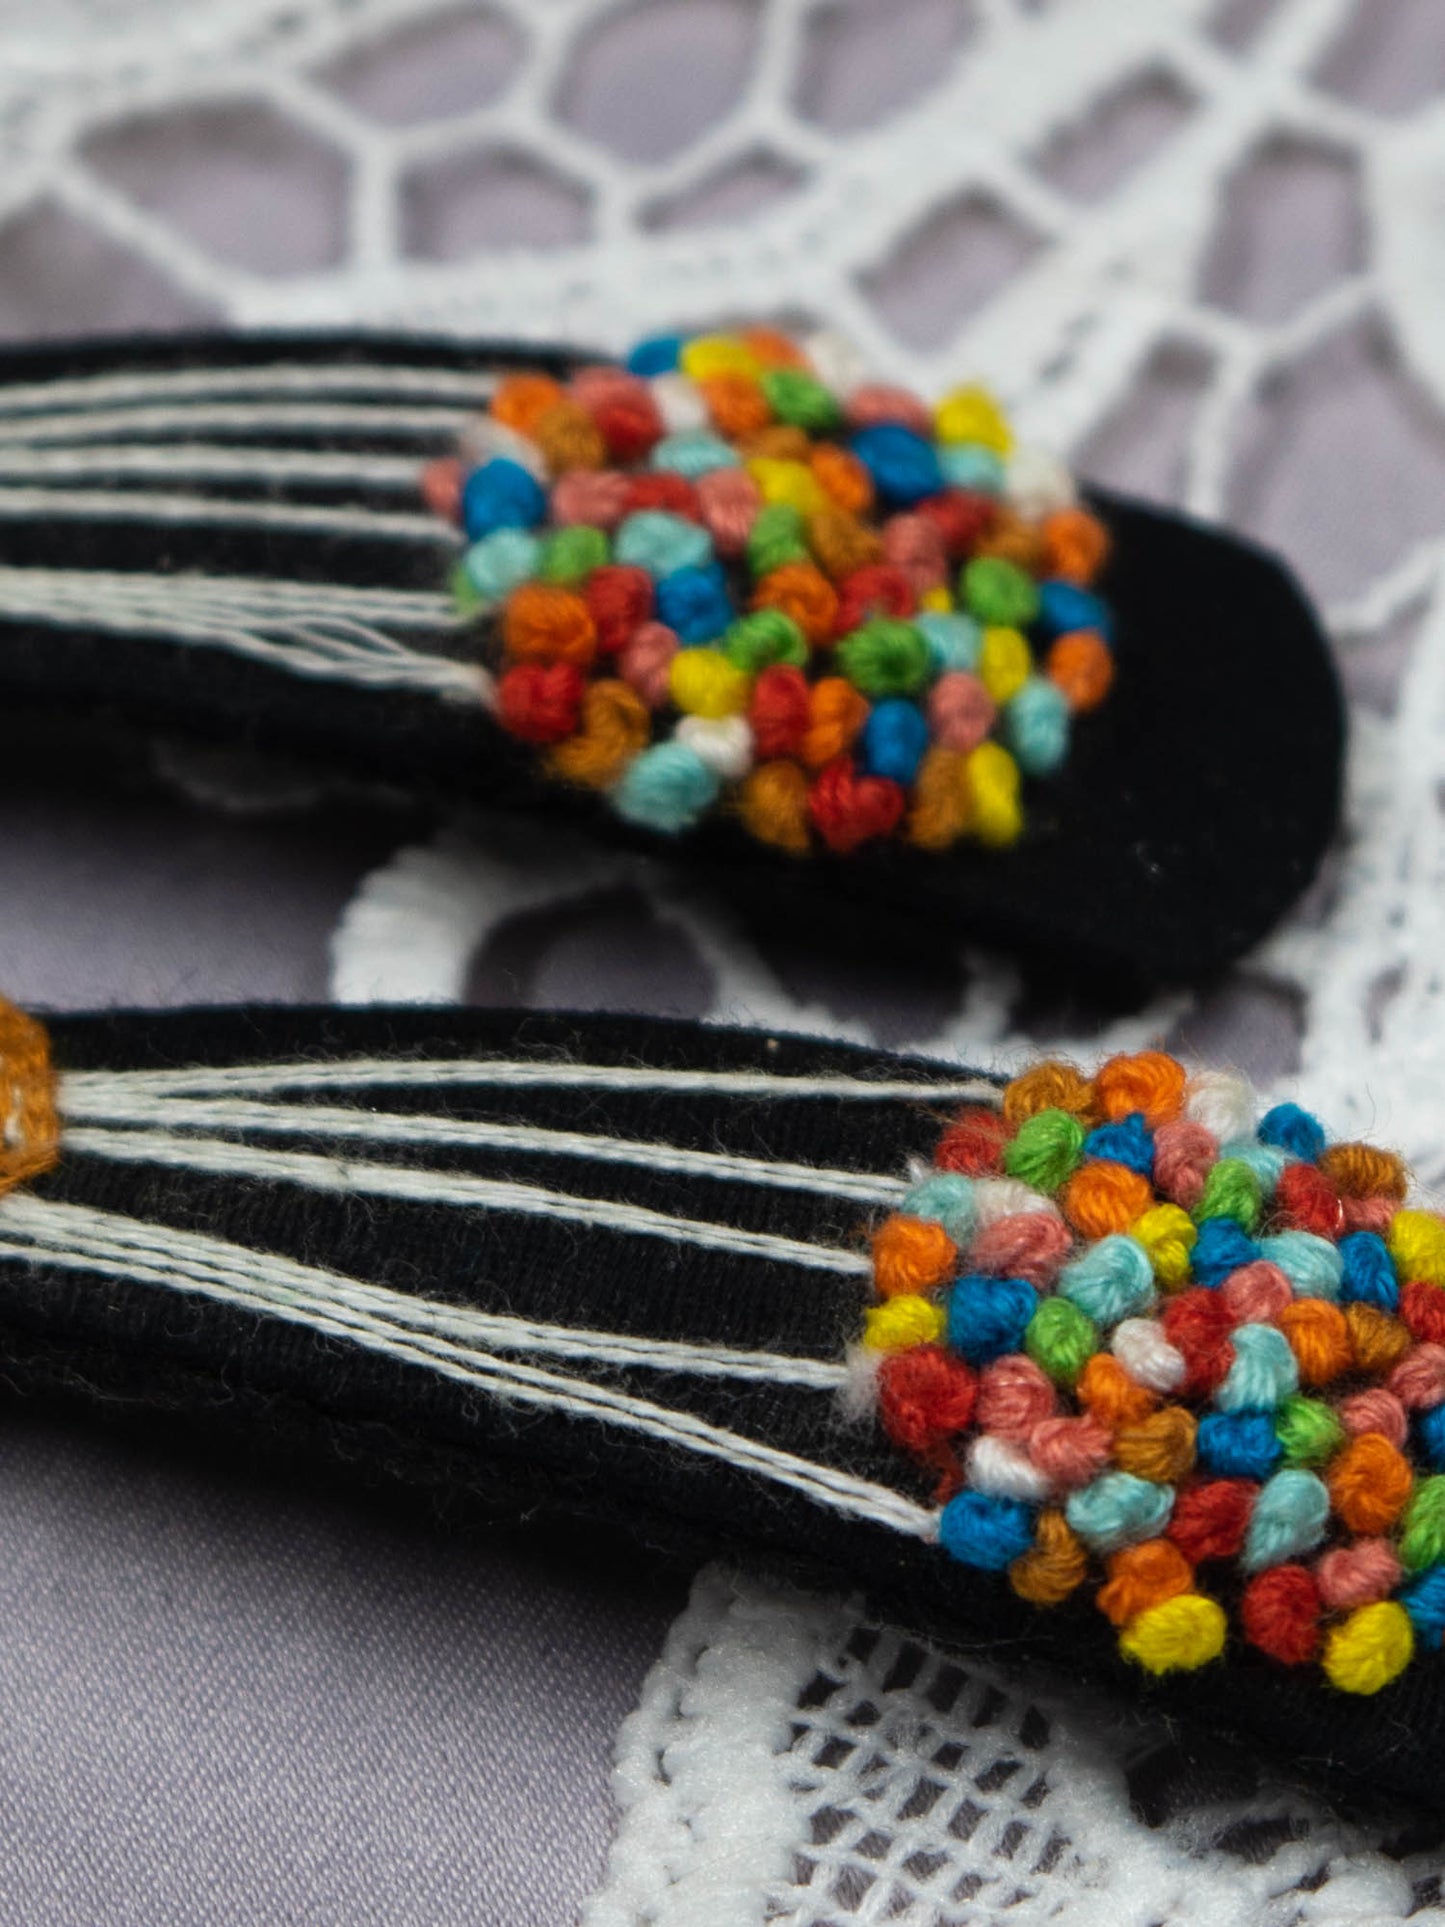 Hand Embroidered Clips (Variation 29)